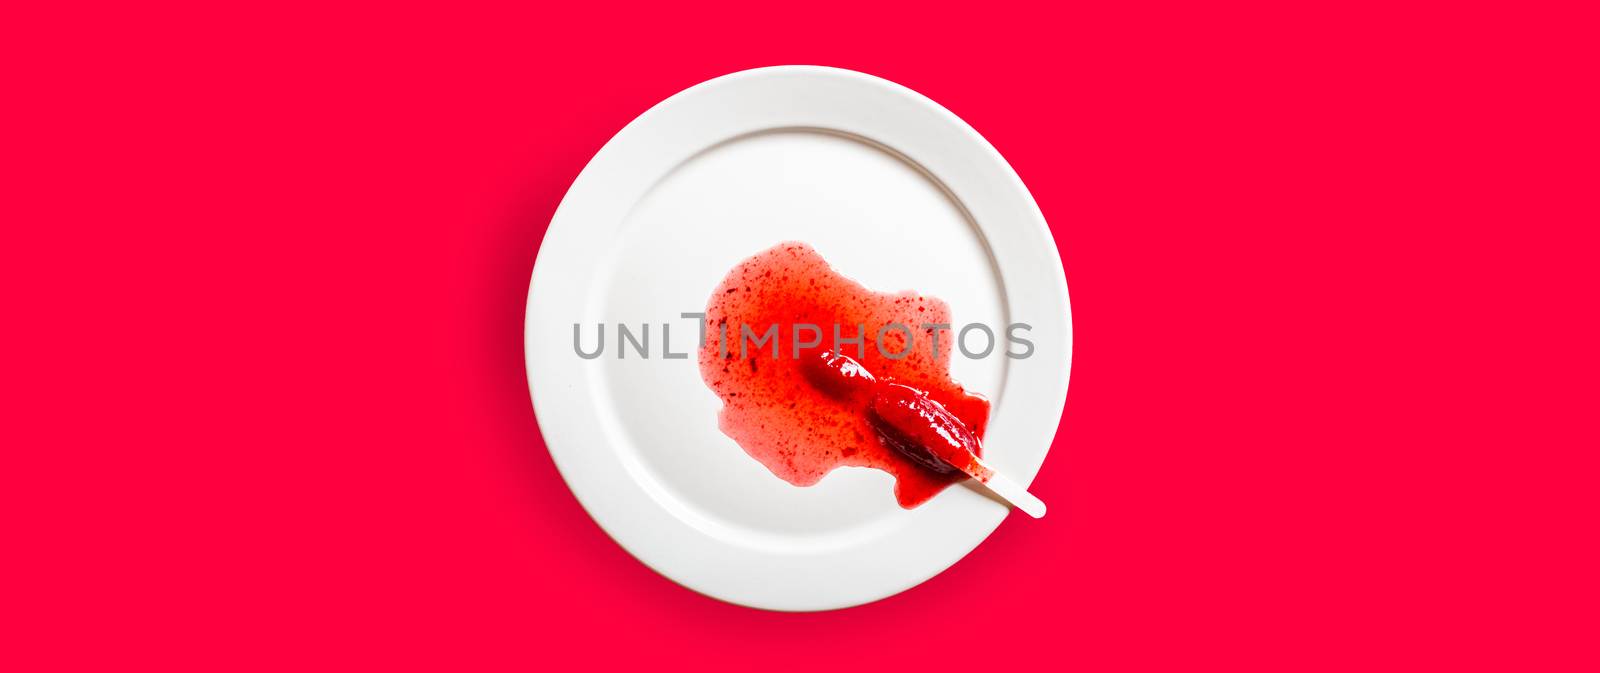 Delicious defrosted strawberry popsicles on white round dish over red background by raferto1973